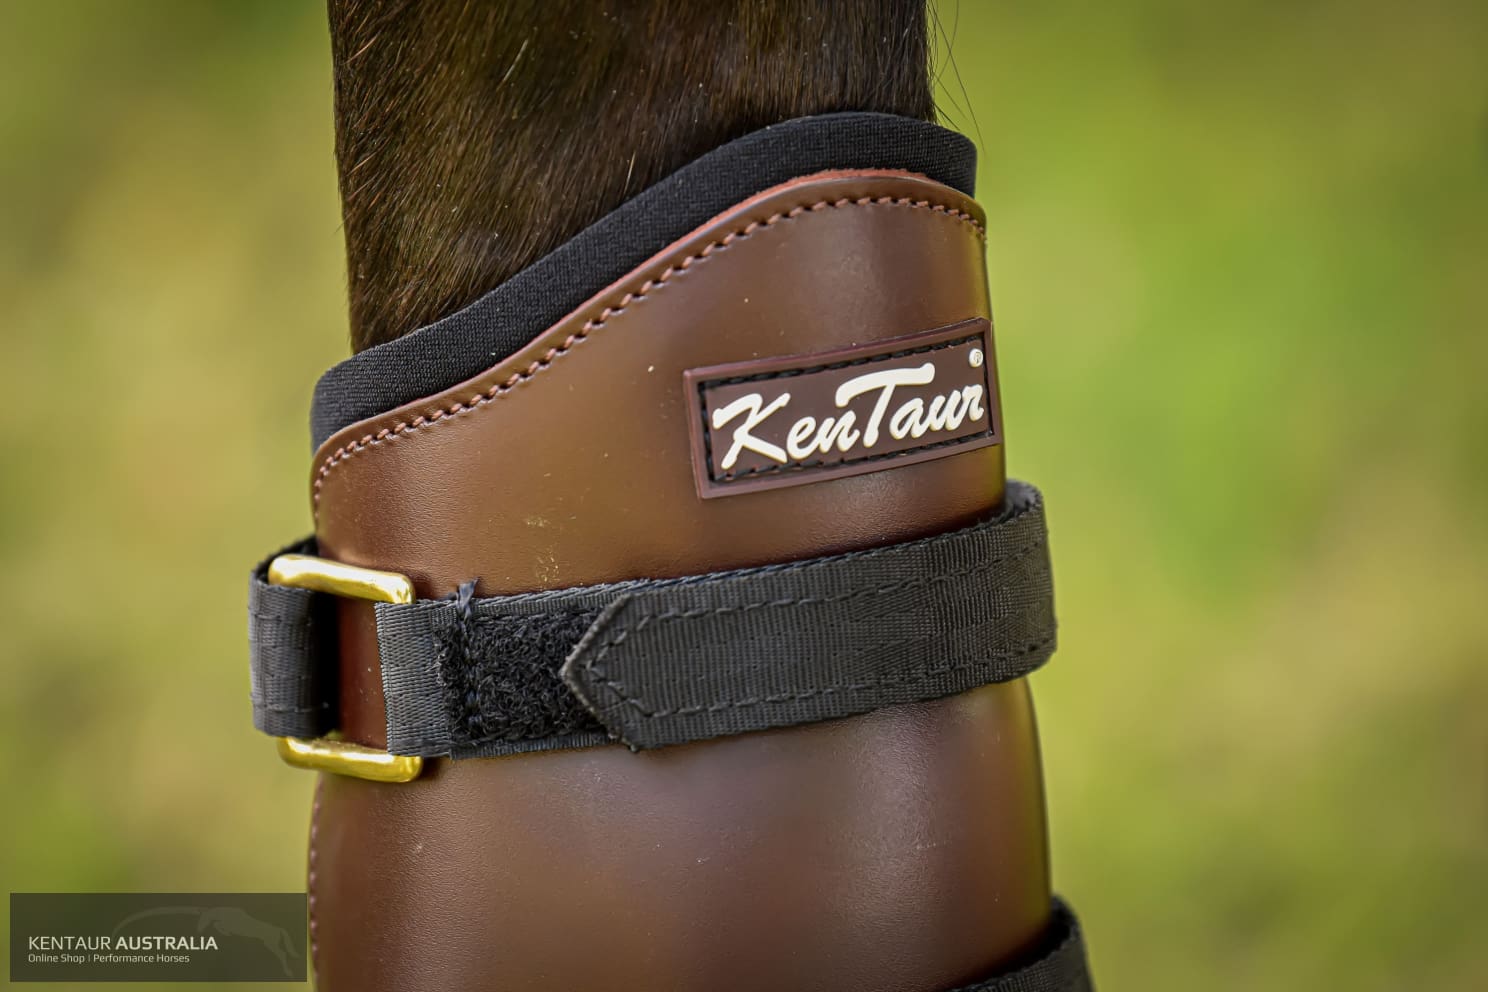 Kentaur Tall Leather Hind Pinch Boots Dark Brown / Full Training Jumping Boots